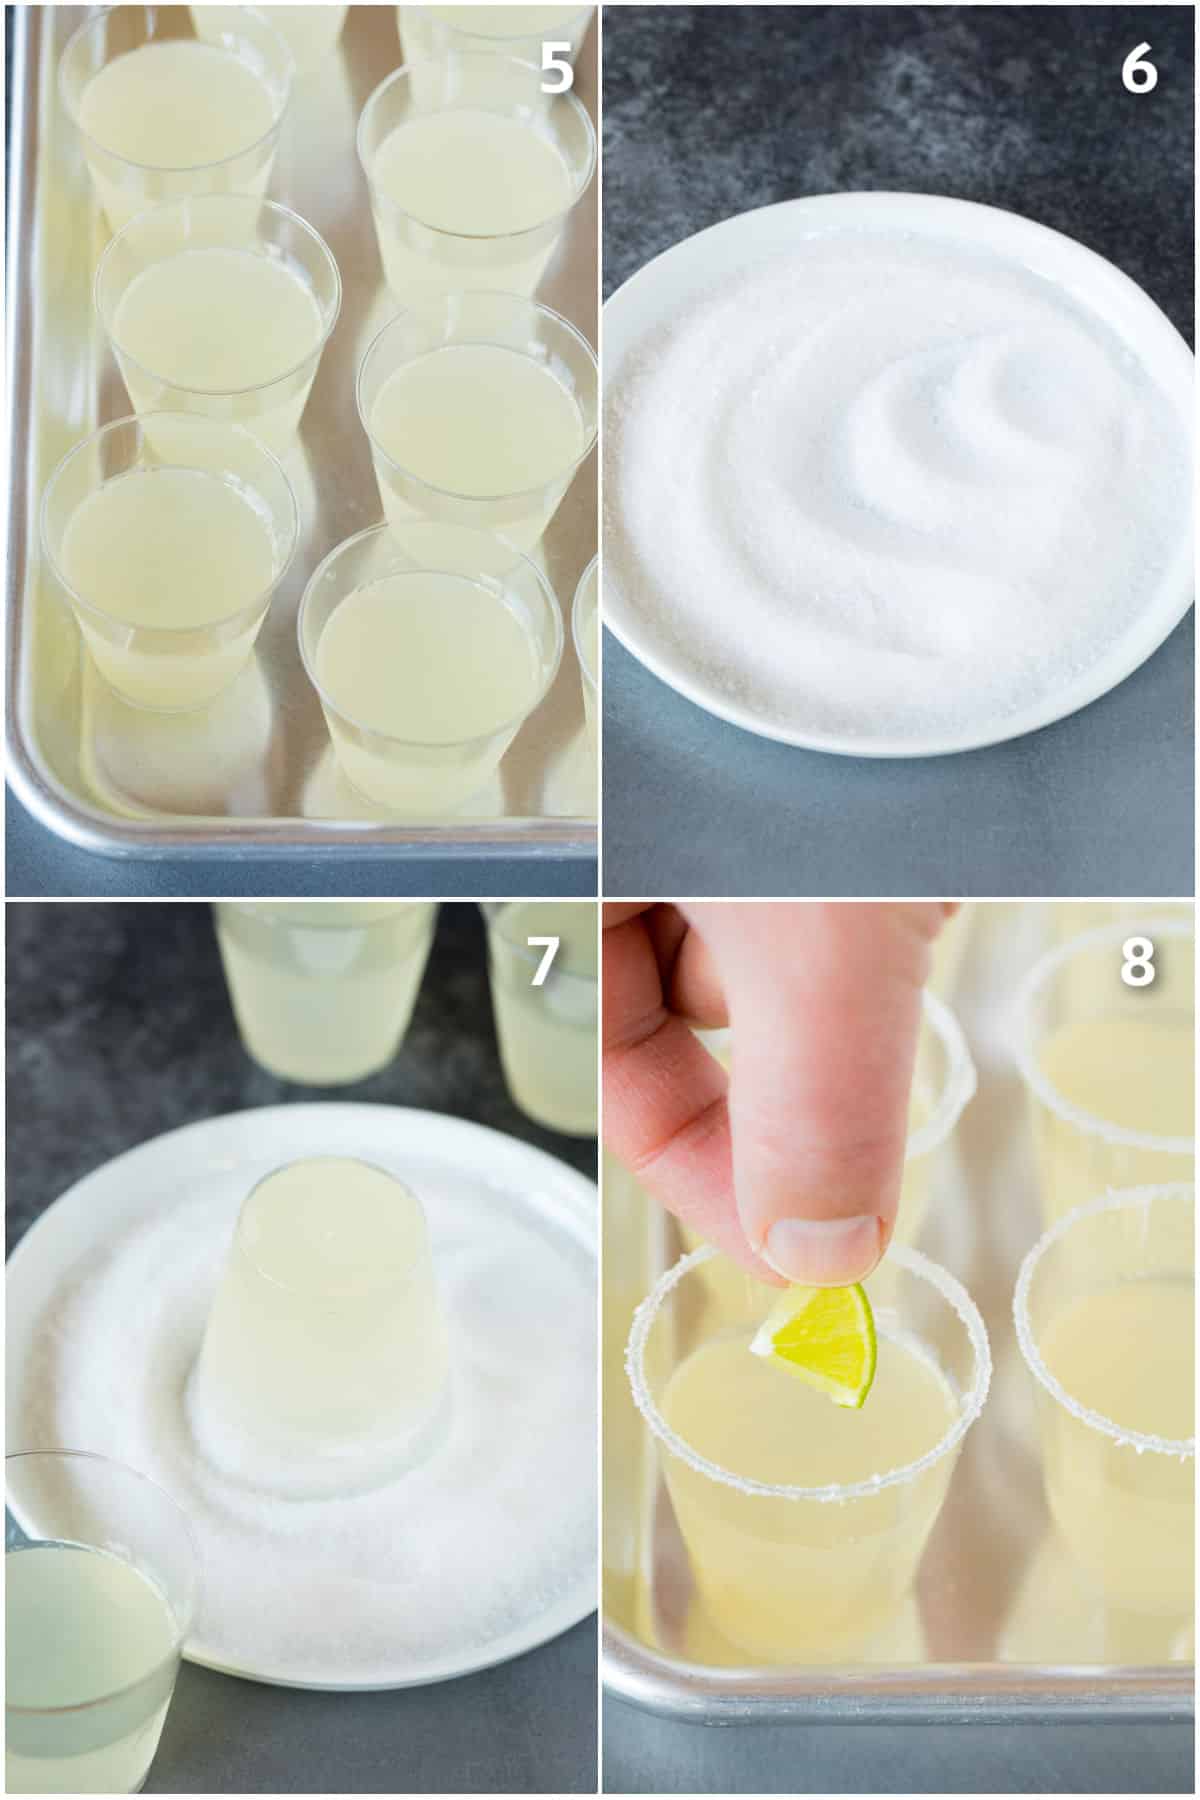 Gelatin shots being dipped into a mixture of sugar and salt.